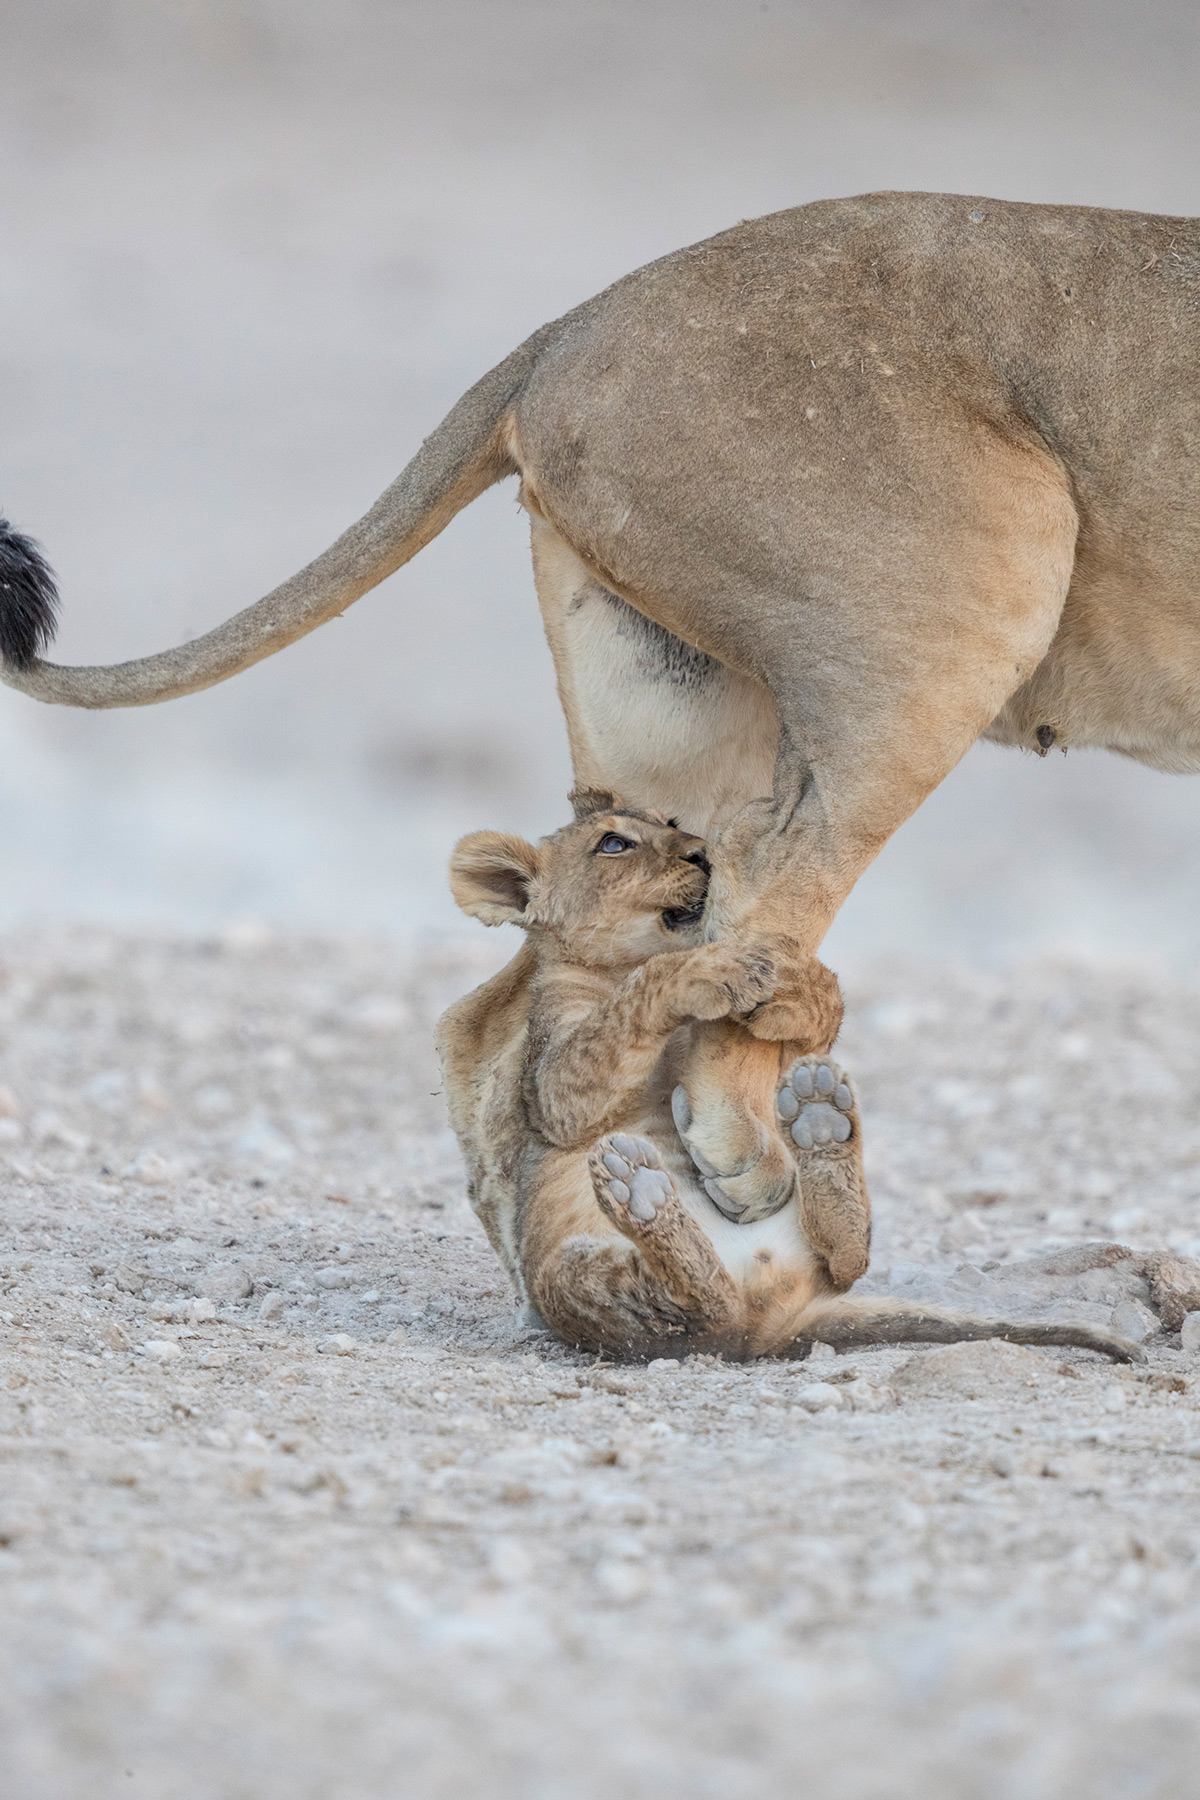 A lion cub grabs his mother's leg as she gets up after resting in Etosha National Park, Namibia © Owen Jason Kandume